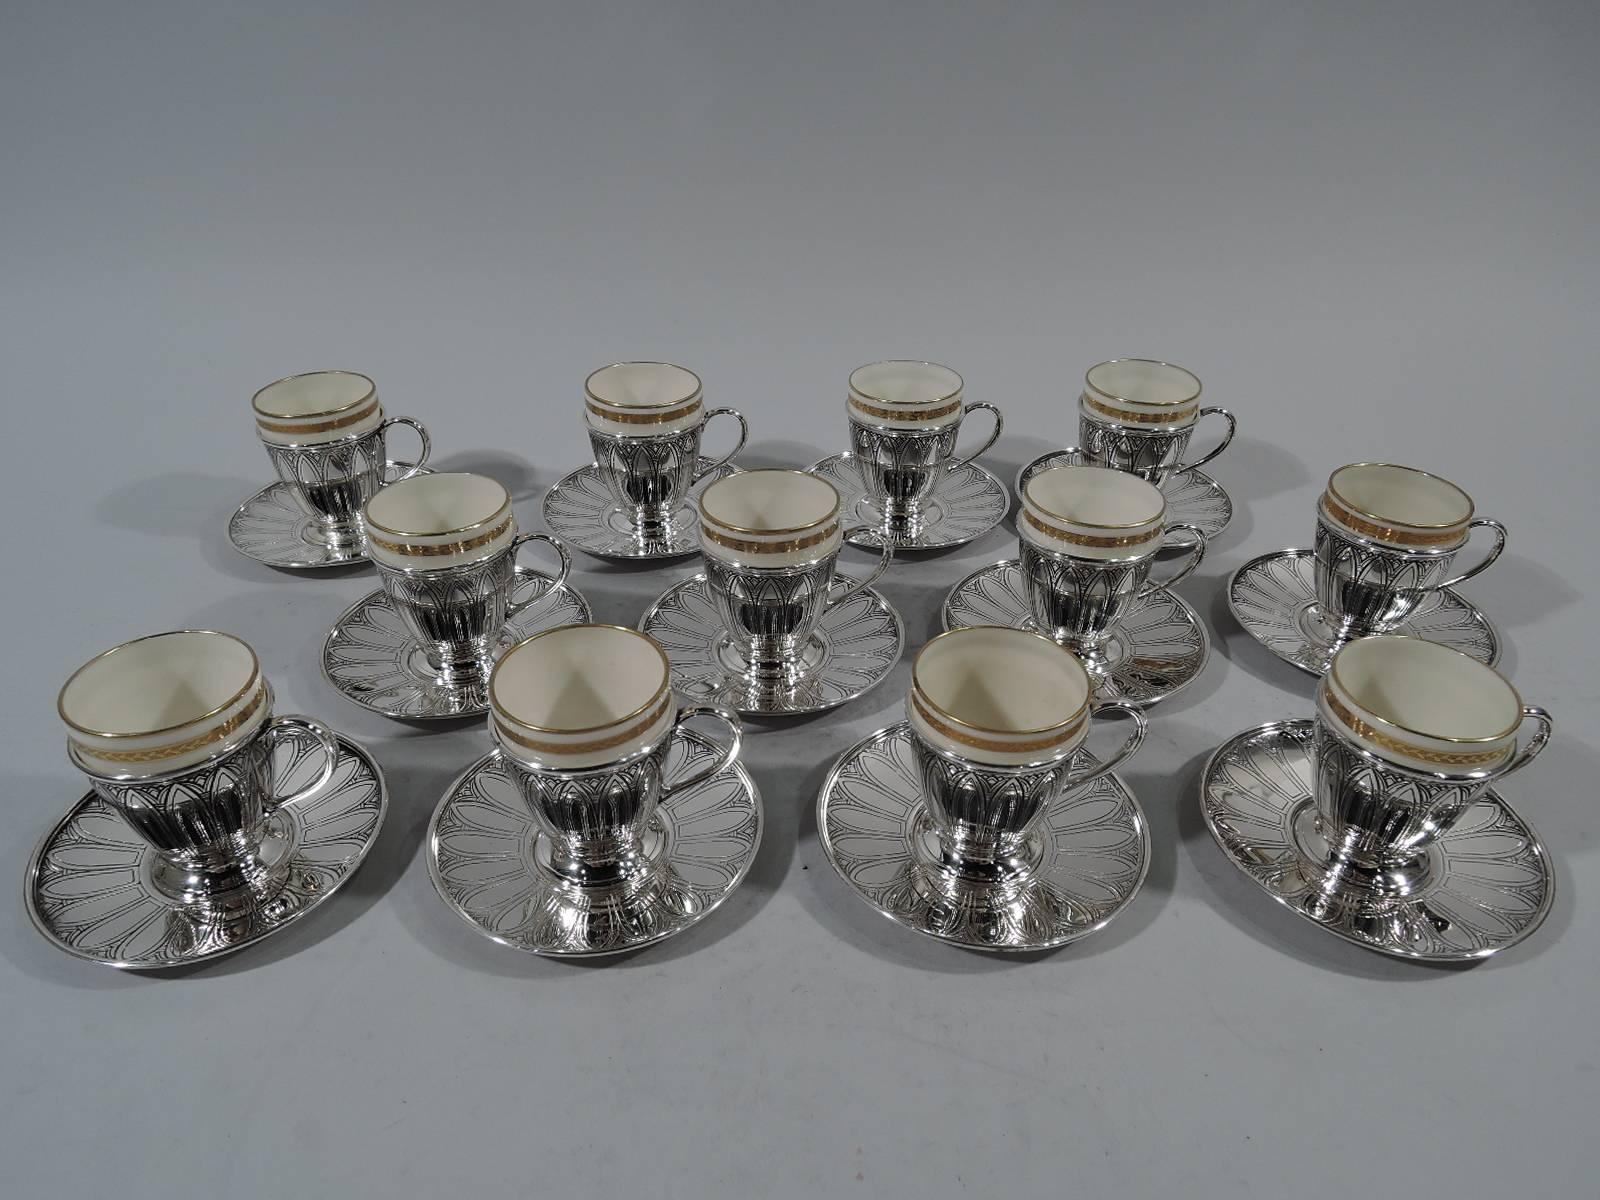 Set of 12 Art Deco sterling silver demitasse cup holders and saucers with 12 bone china liners. The holders and saucers were made by Tiffany & Co. in New York, circa 1923. The liners were made by Lenox in Trenton, New Jersey for Tiffany &